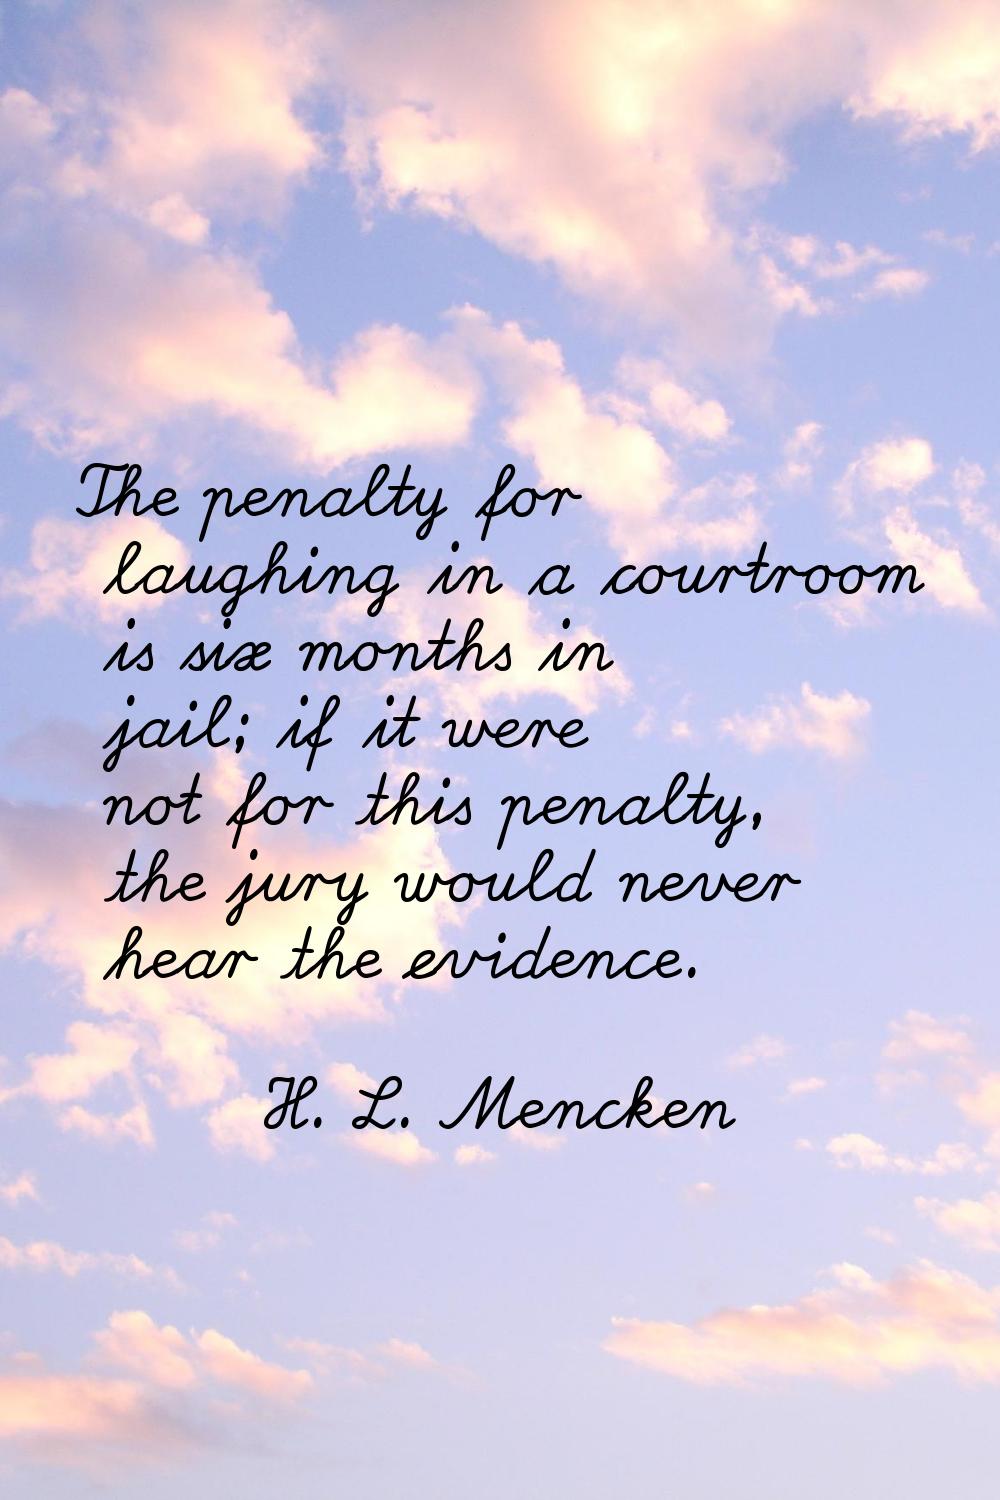 The penalty for laughing in a courtroom is six months in jail; if it were not for this penalty, the